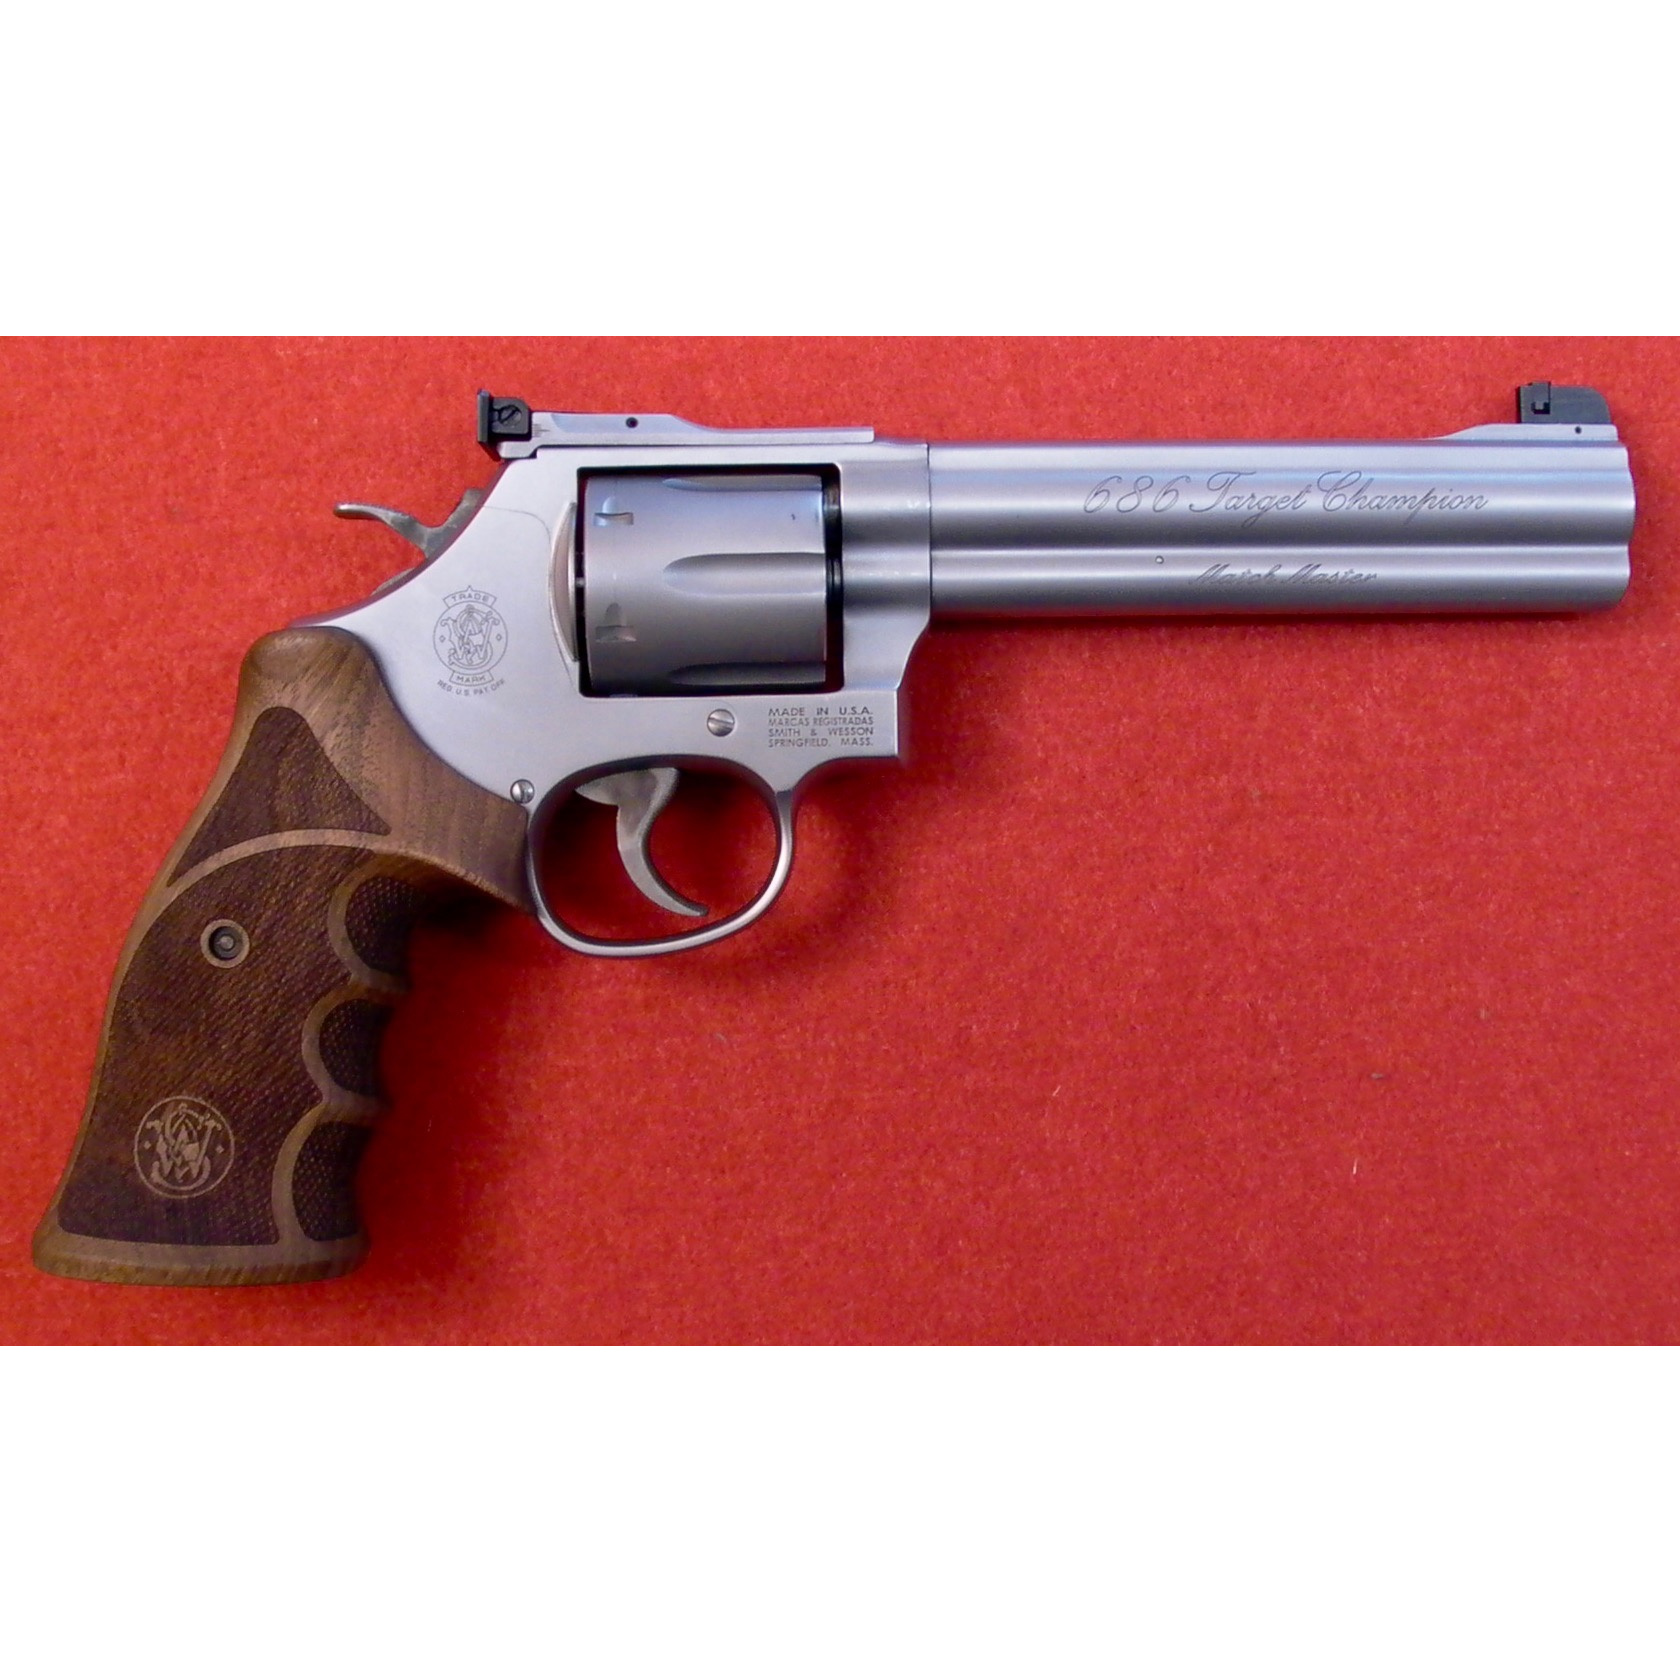 Smith & Wesson Mod. 686 Target Champion Match Master